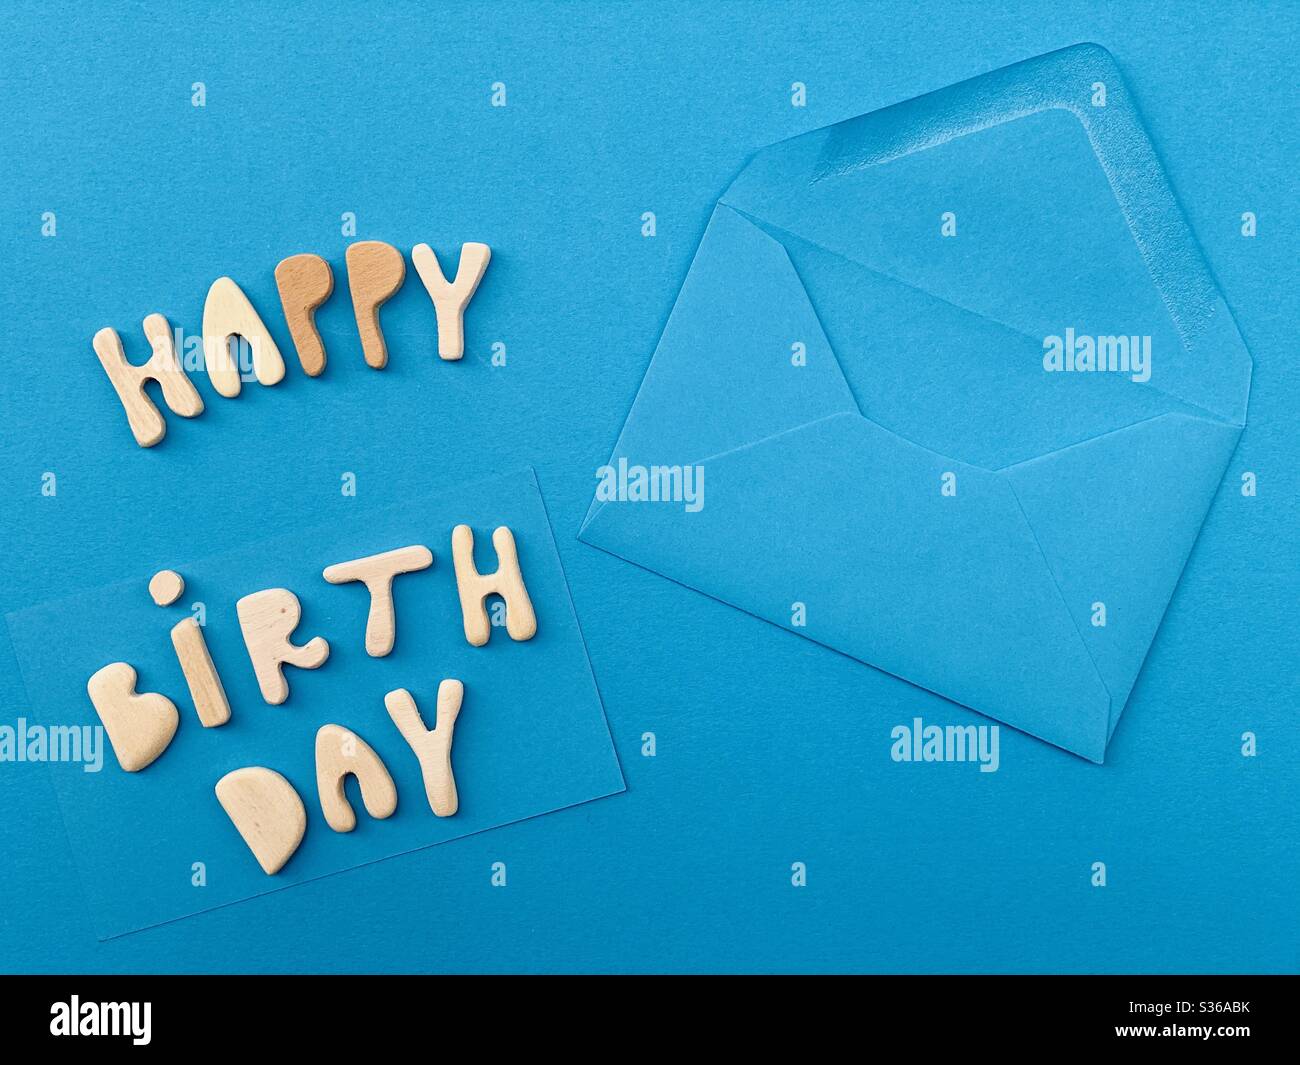 Happy Birthday message composed with handmade wooden letters on a blue card Stock Photo